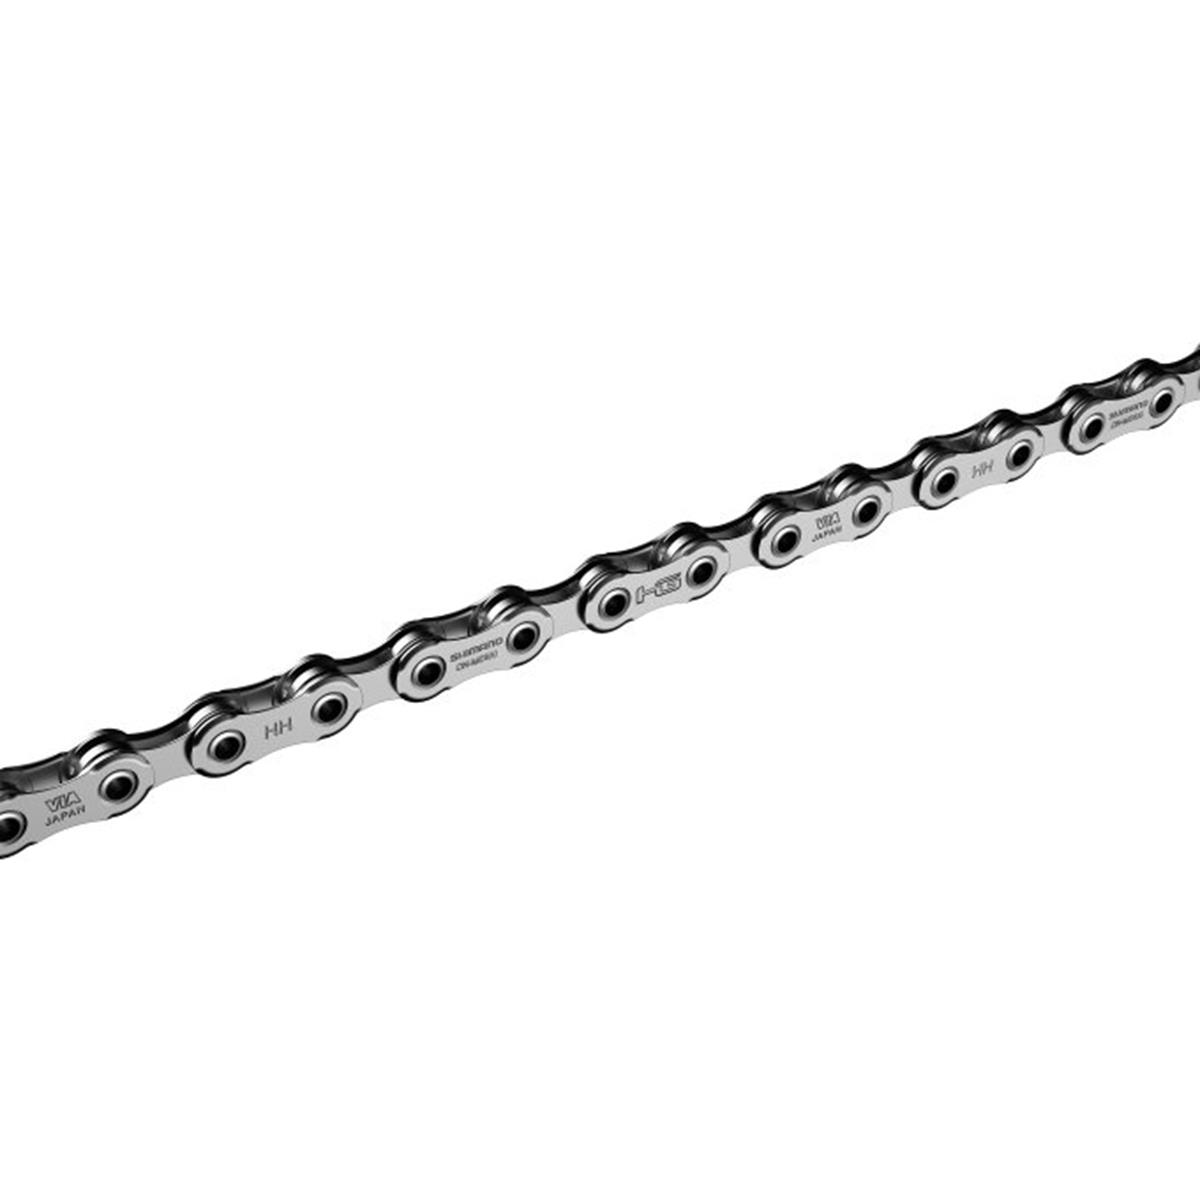 Shimano MTB Chain CN-M8100 116 Links, 12-Speed, with Master Link